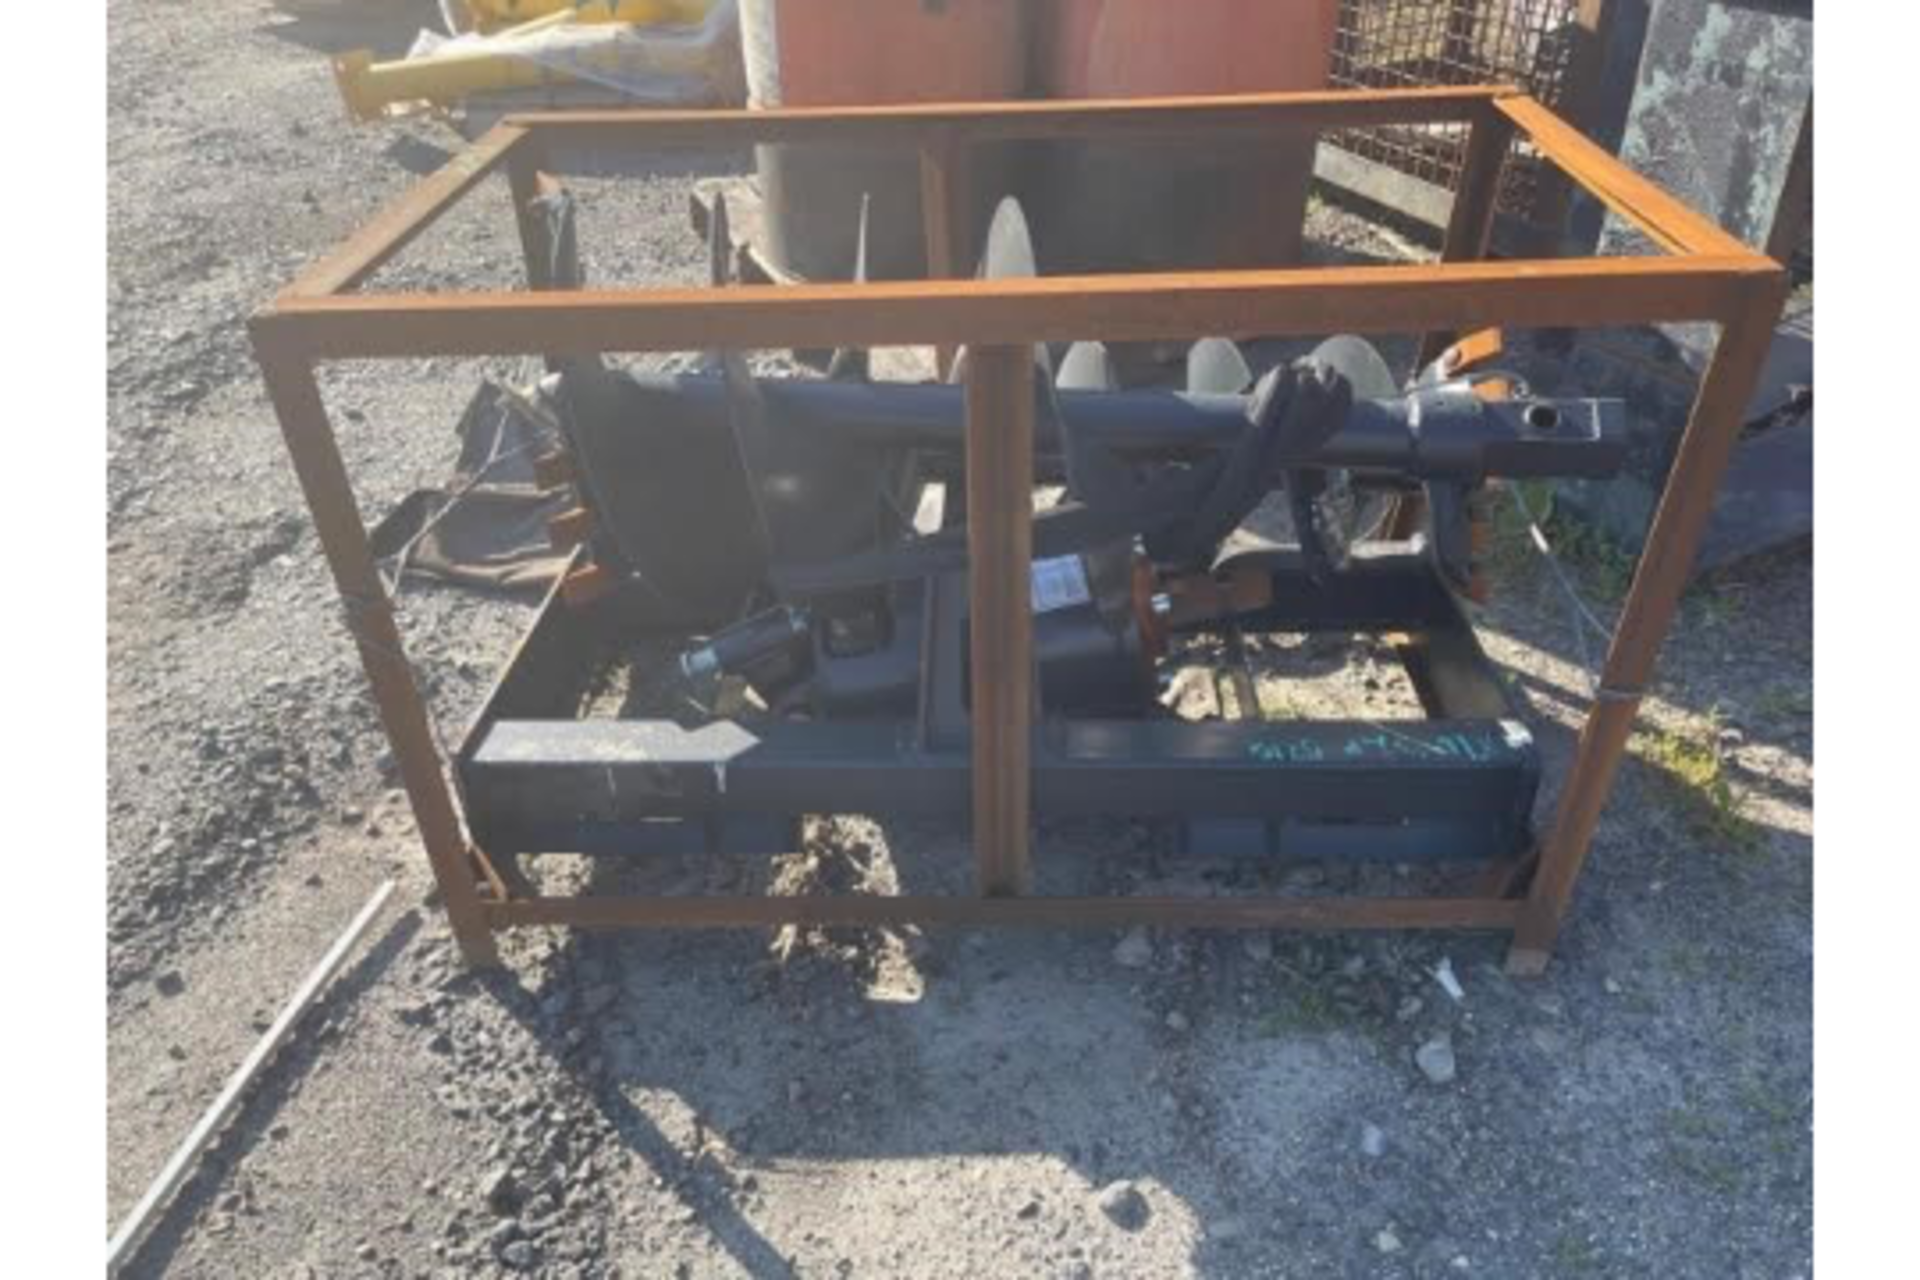 New Skid Steer Auger Attachment- Located in Lester, PA